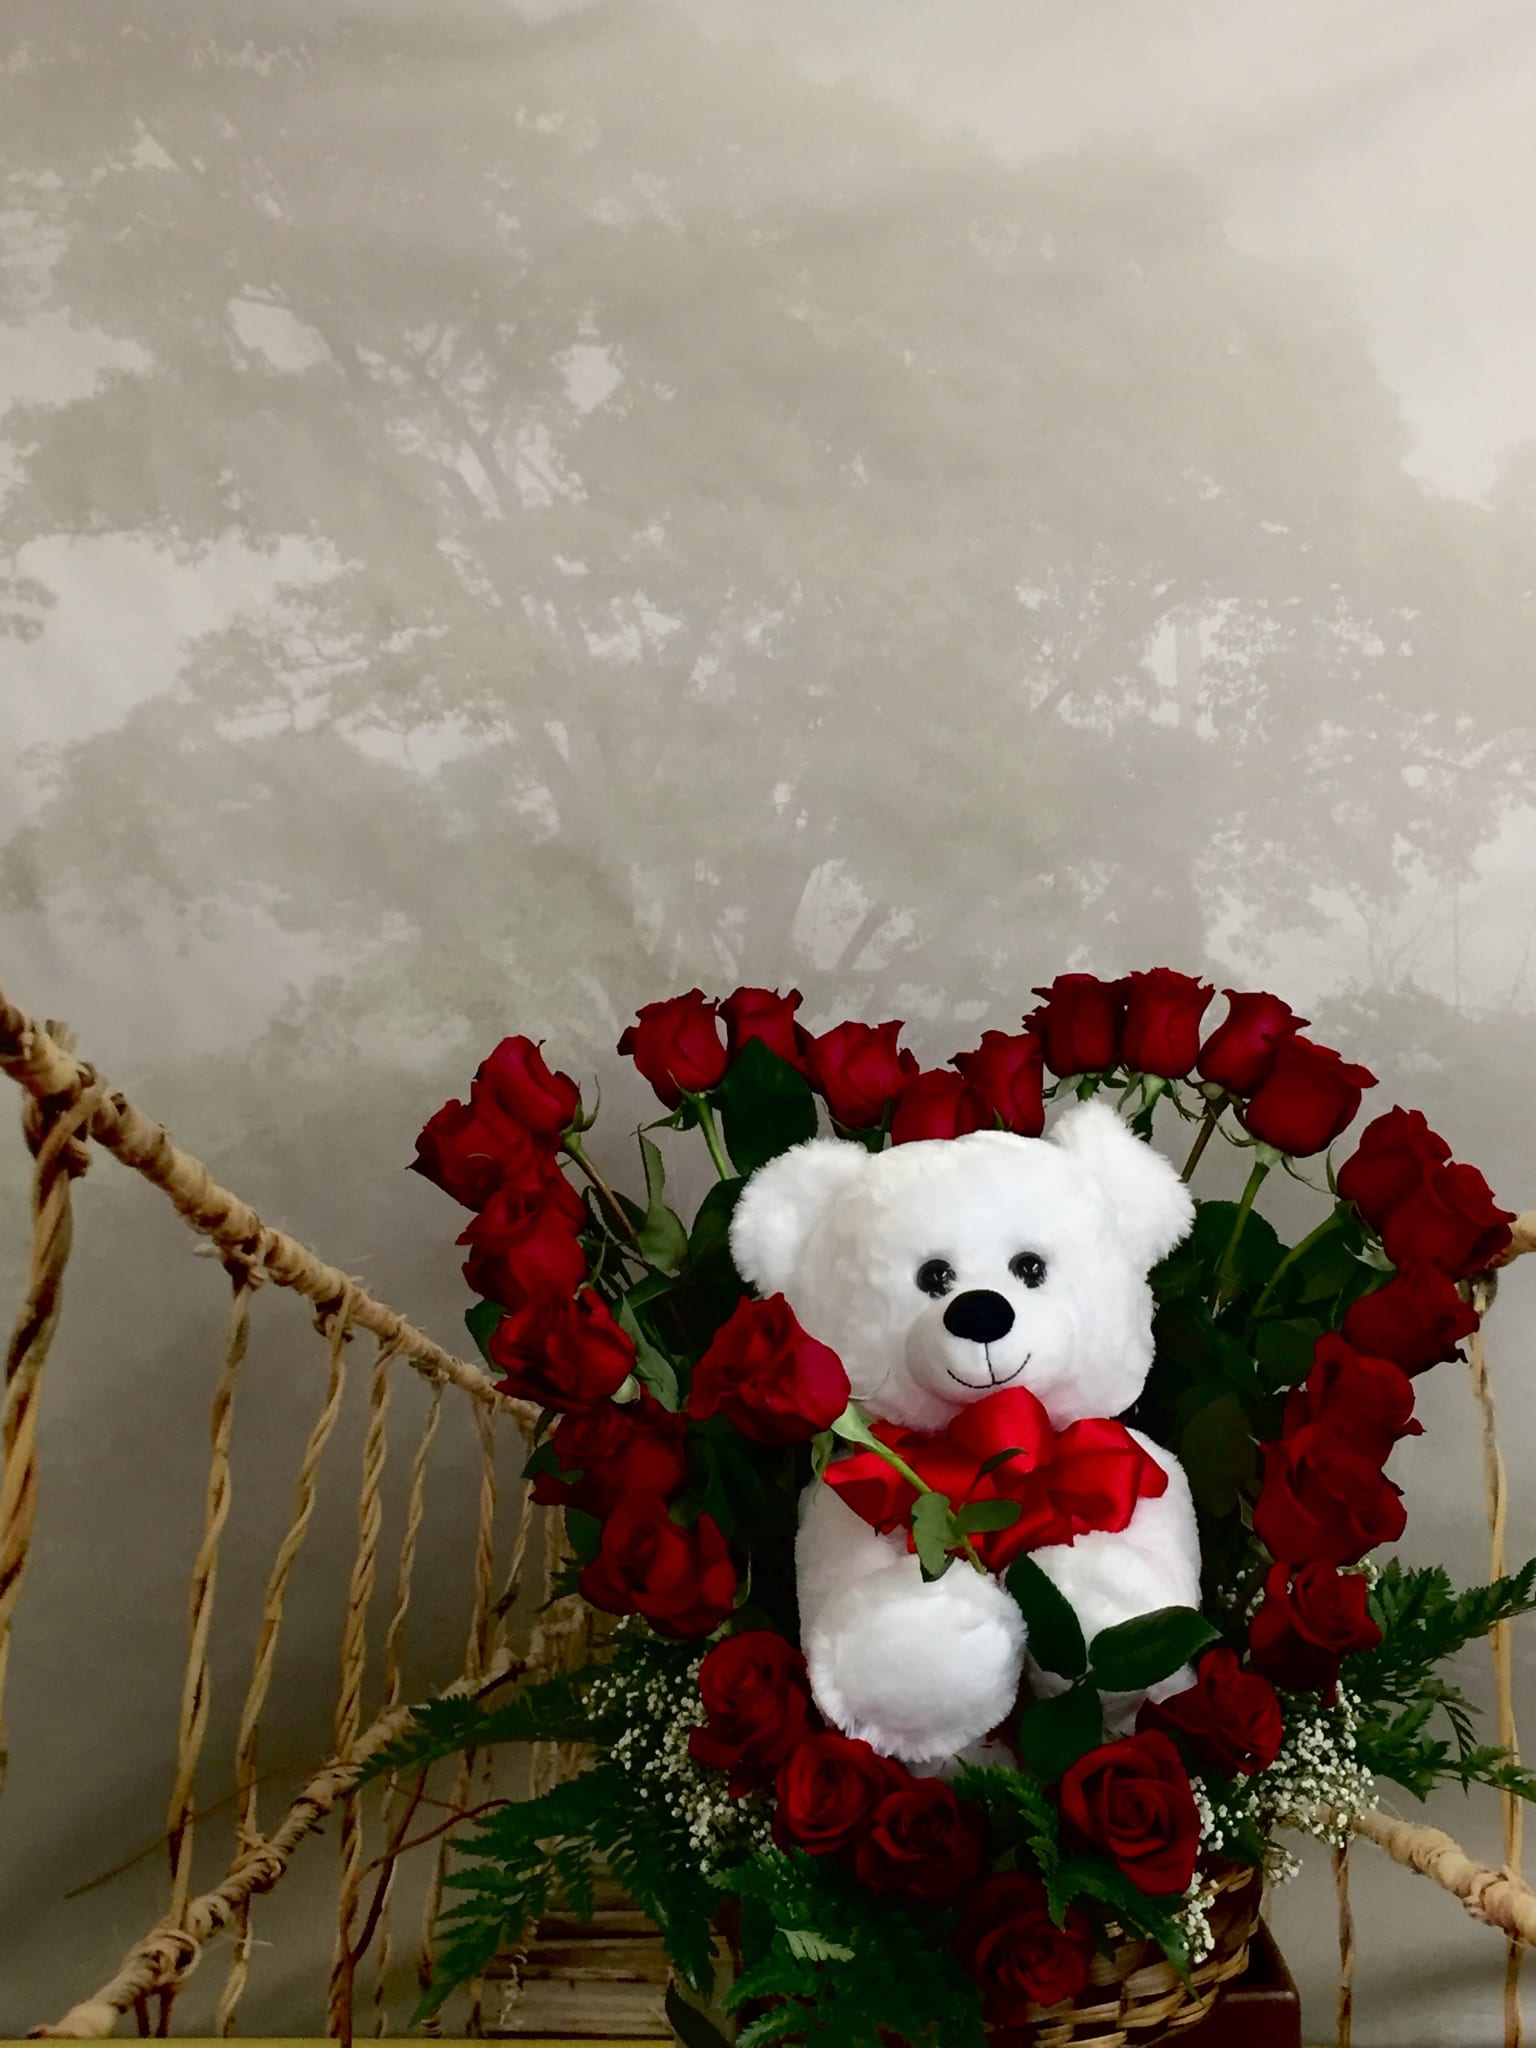 roses and bears